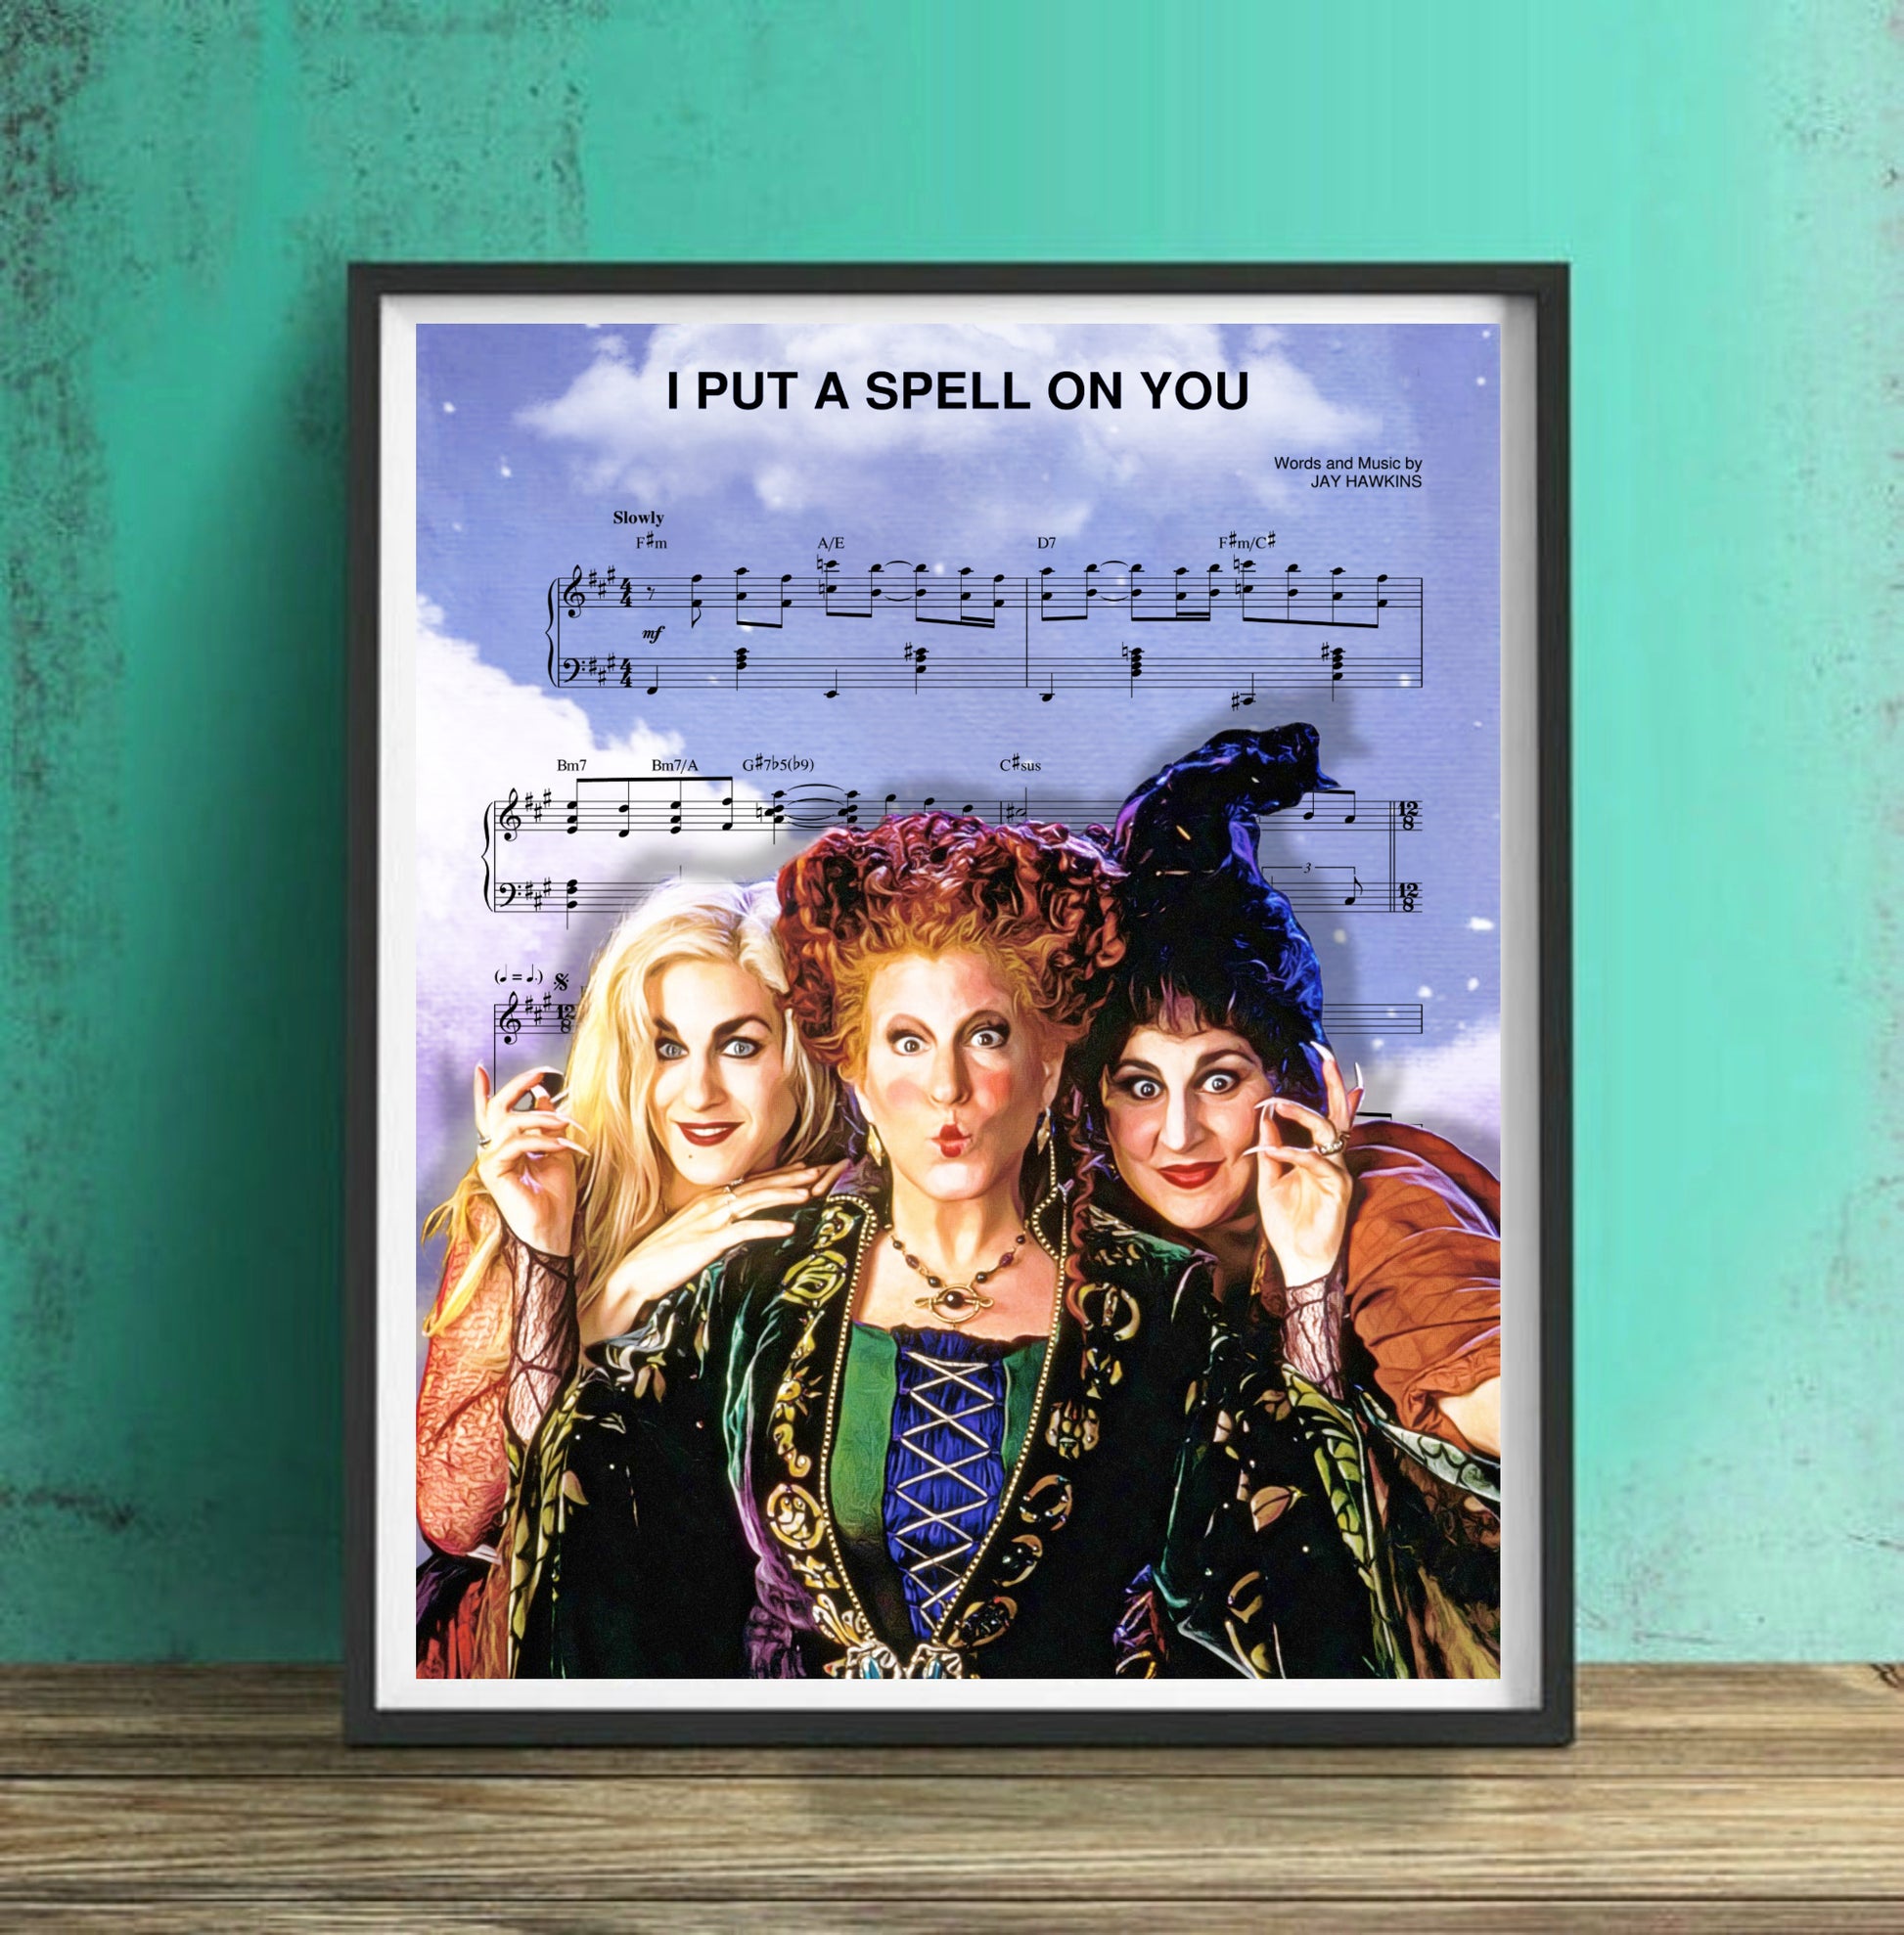 I put a spell on you sheet music from hocus pocus